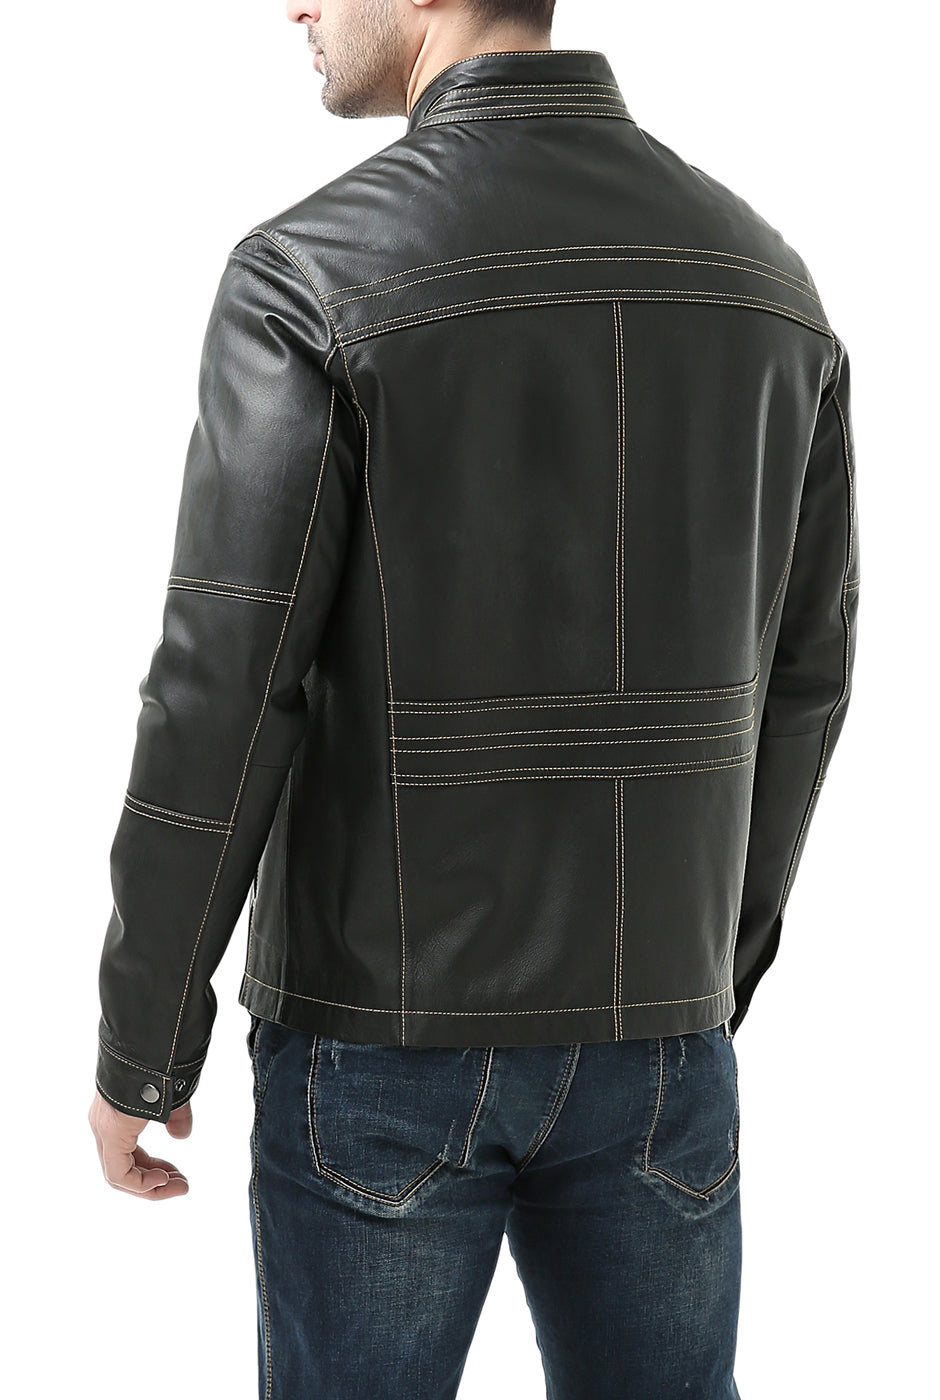 BGSD Monogram Collection Men Cowhide Leather Motorcycle Jacket